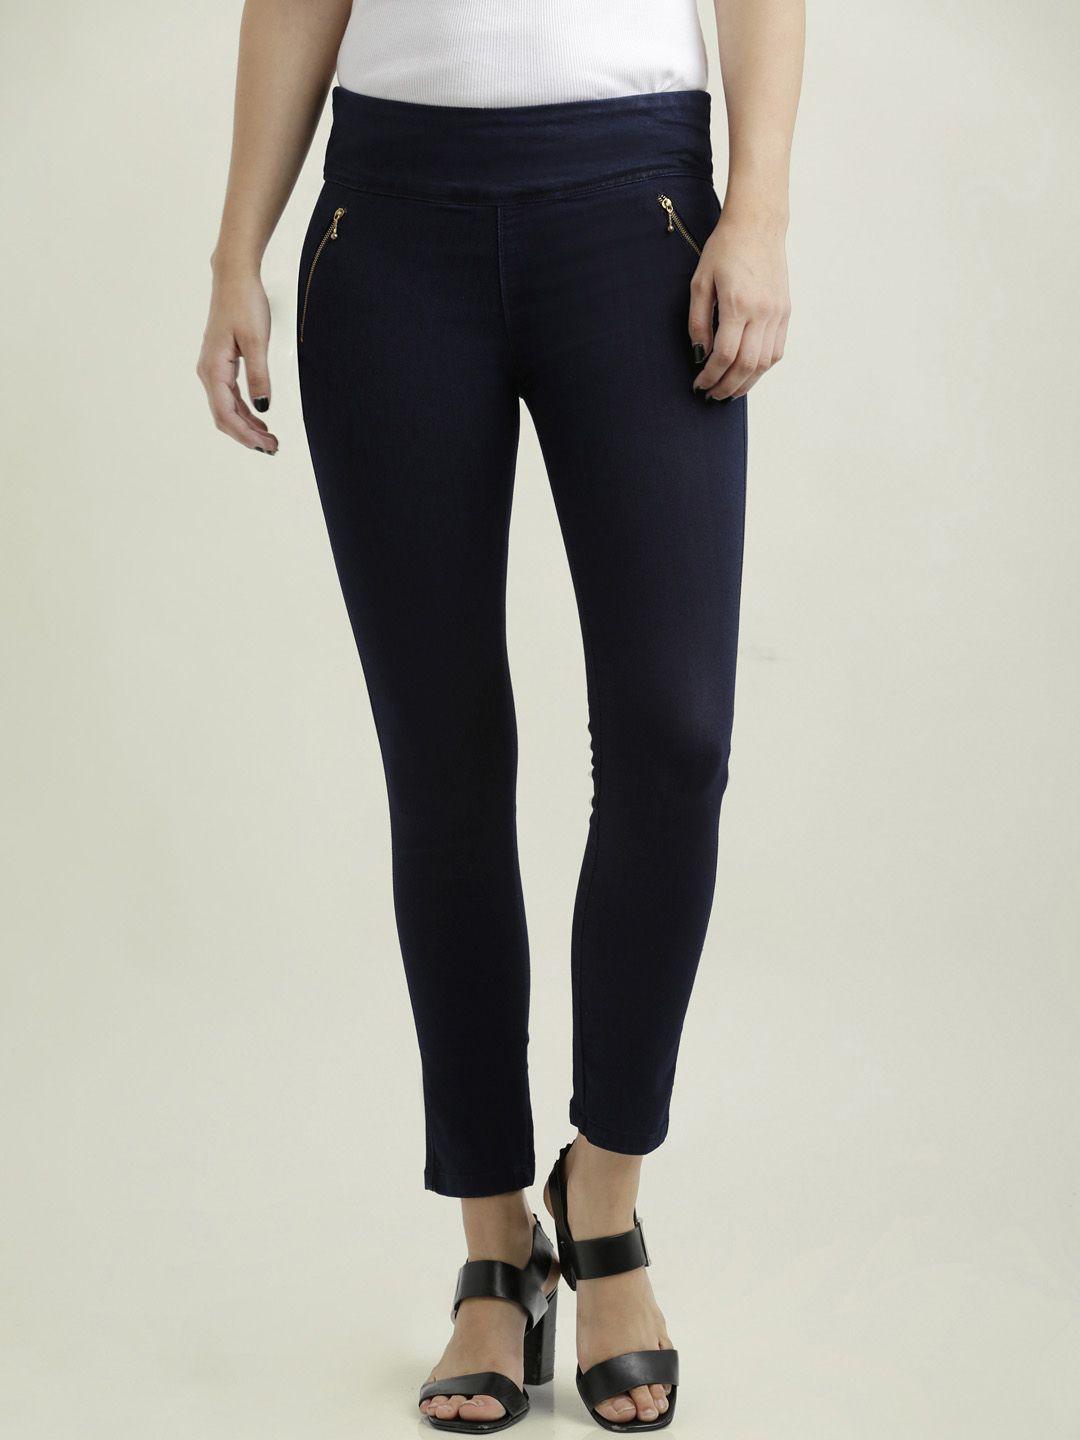 Miss Chase Solid Blue Super Skinny High Rise Jeggings